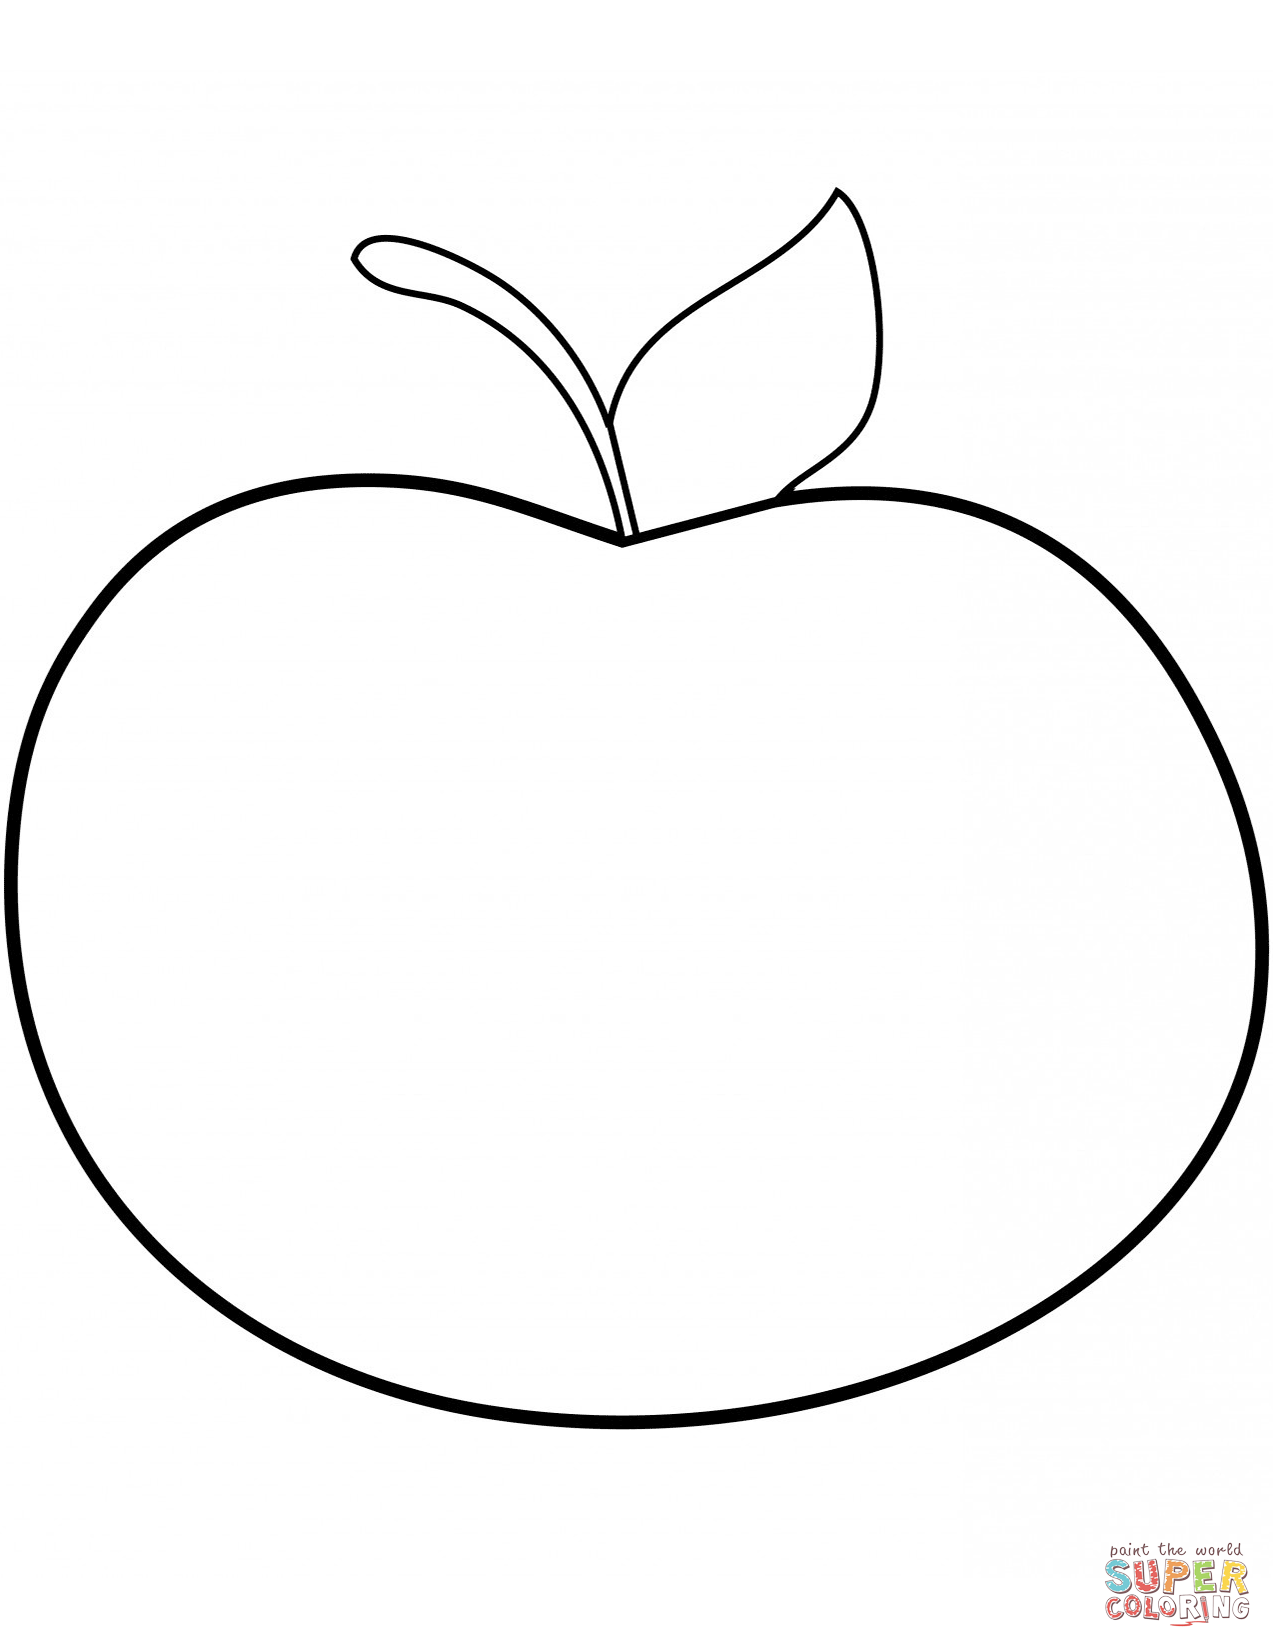 Simple apple coloring page free printable coloring pages